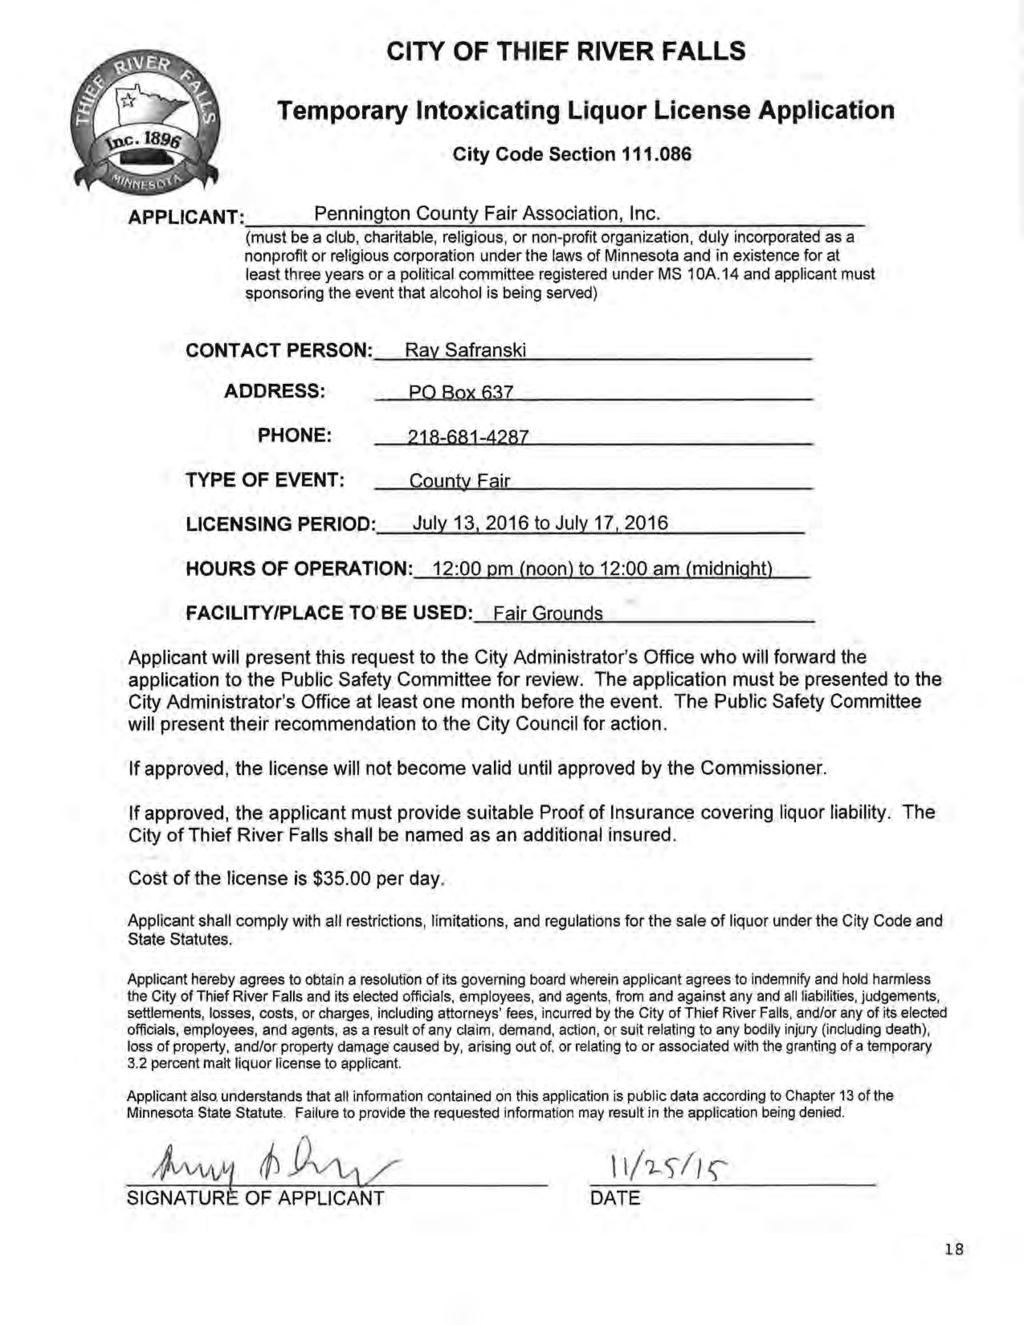 CITY OF THIEF RIVER FALLS Temporary Intoxicating Liquor License Application City Code Section 111.086 APPLICANT =----:---:P_e-:-n-:-n_in-'g::.